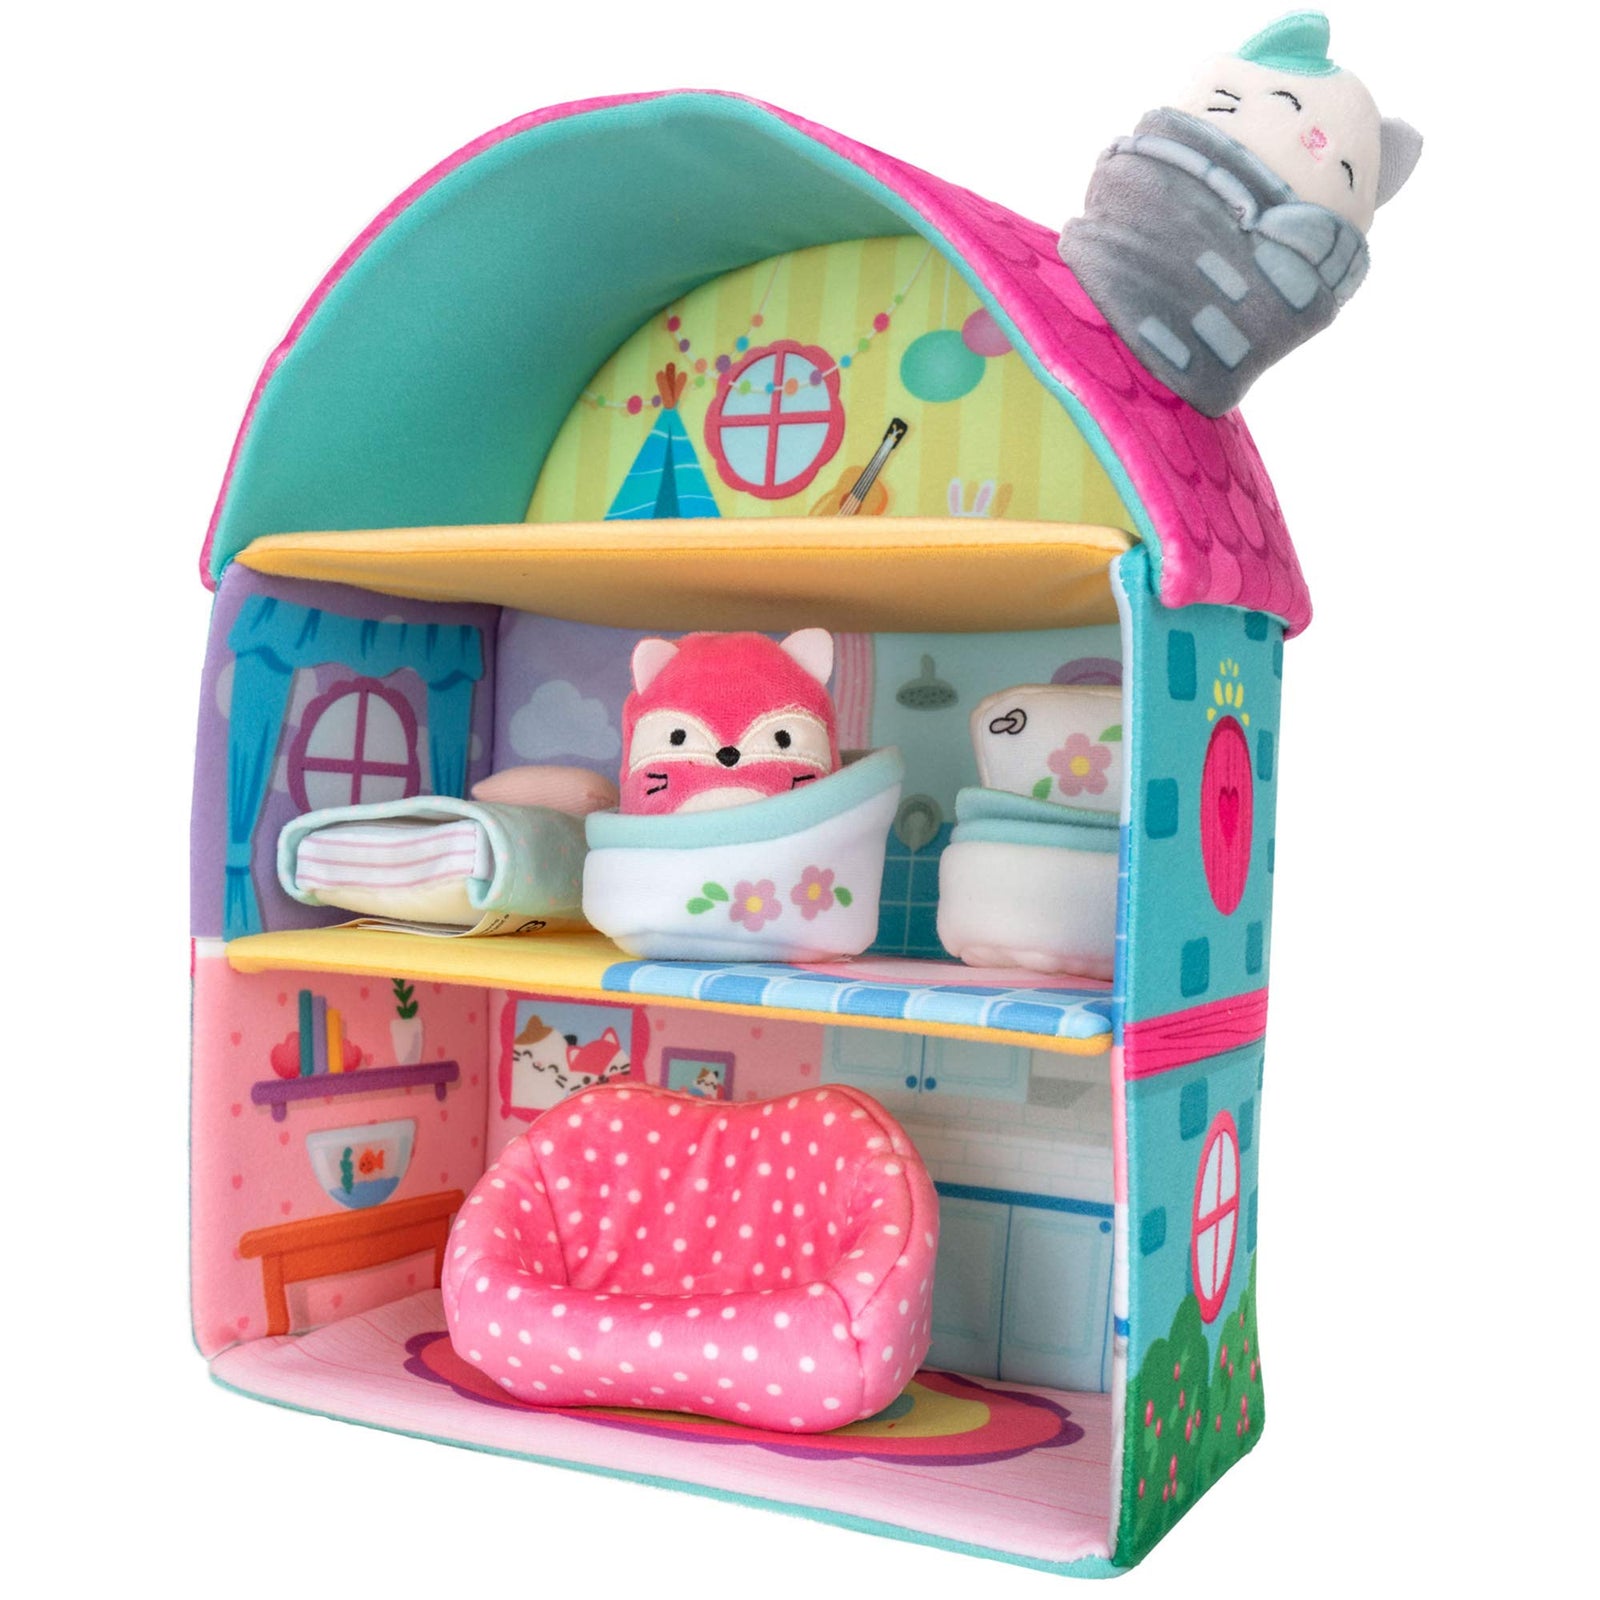 Squishville by Squishmallow Fifi’s Cottage Townhouse, 2” Blair and Fifi Soft Mini-Squishmallow and 4 Plush Furniture Accessories, Irresistibly Soft Plush Toys, 3 Floors to Explore, Amazon Exclusive